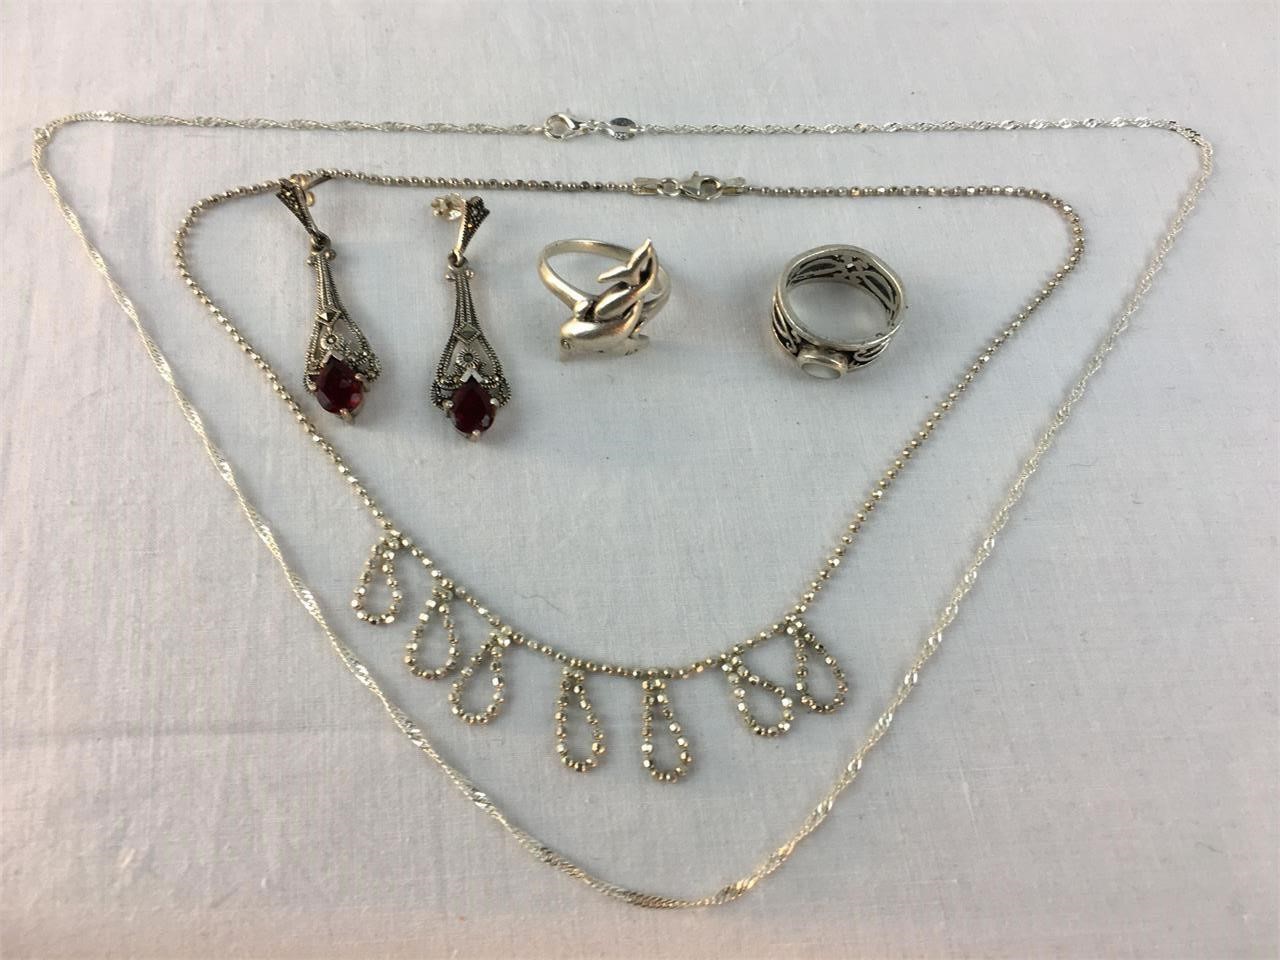 Lot of sterling silver jewelry